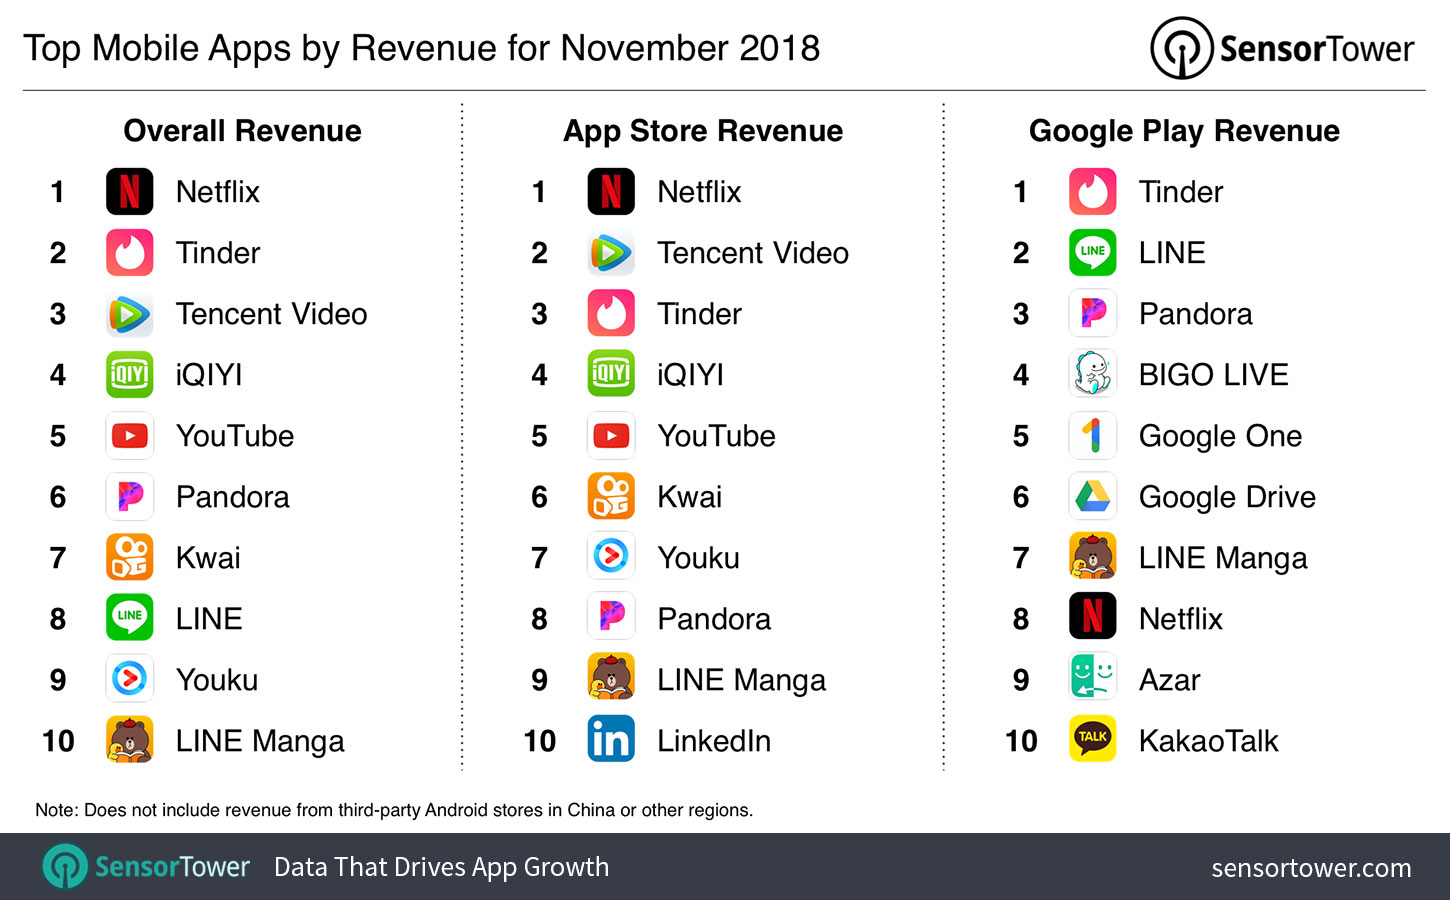 Top Mobile Apps by Revenue for November 2018